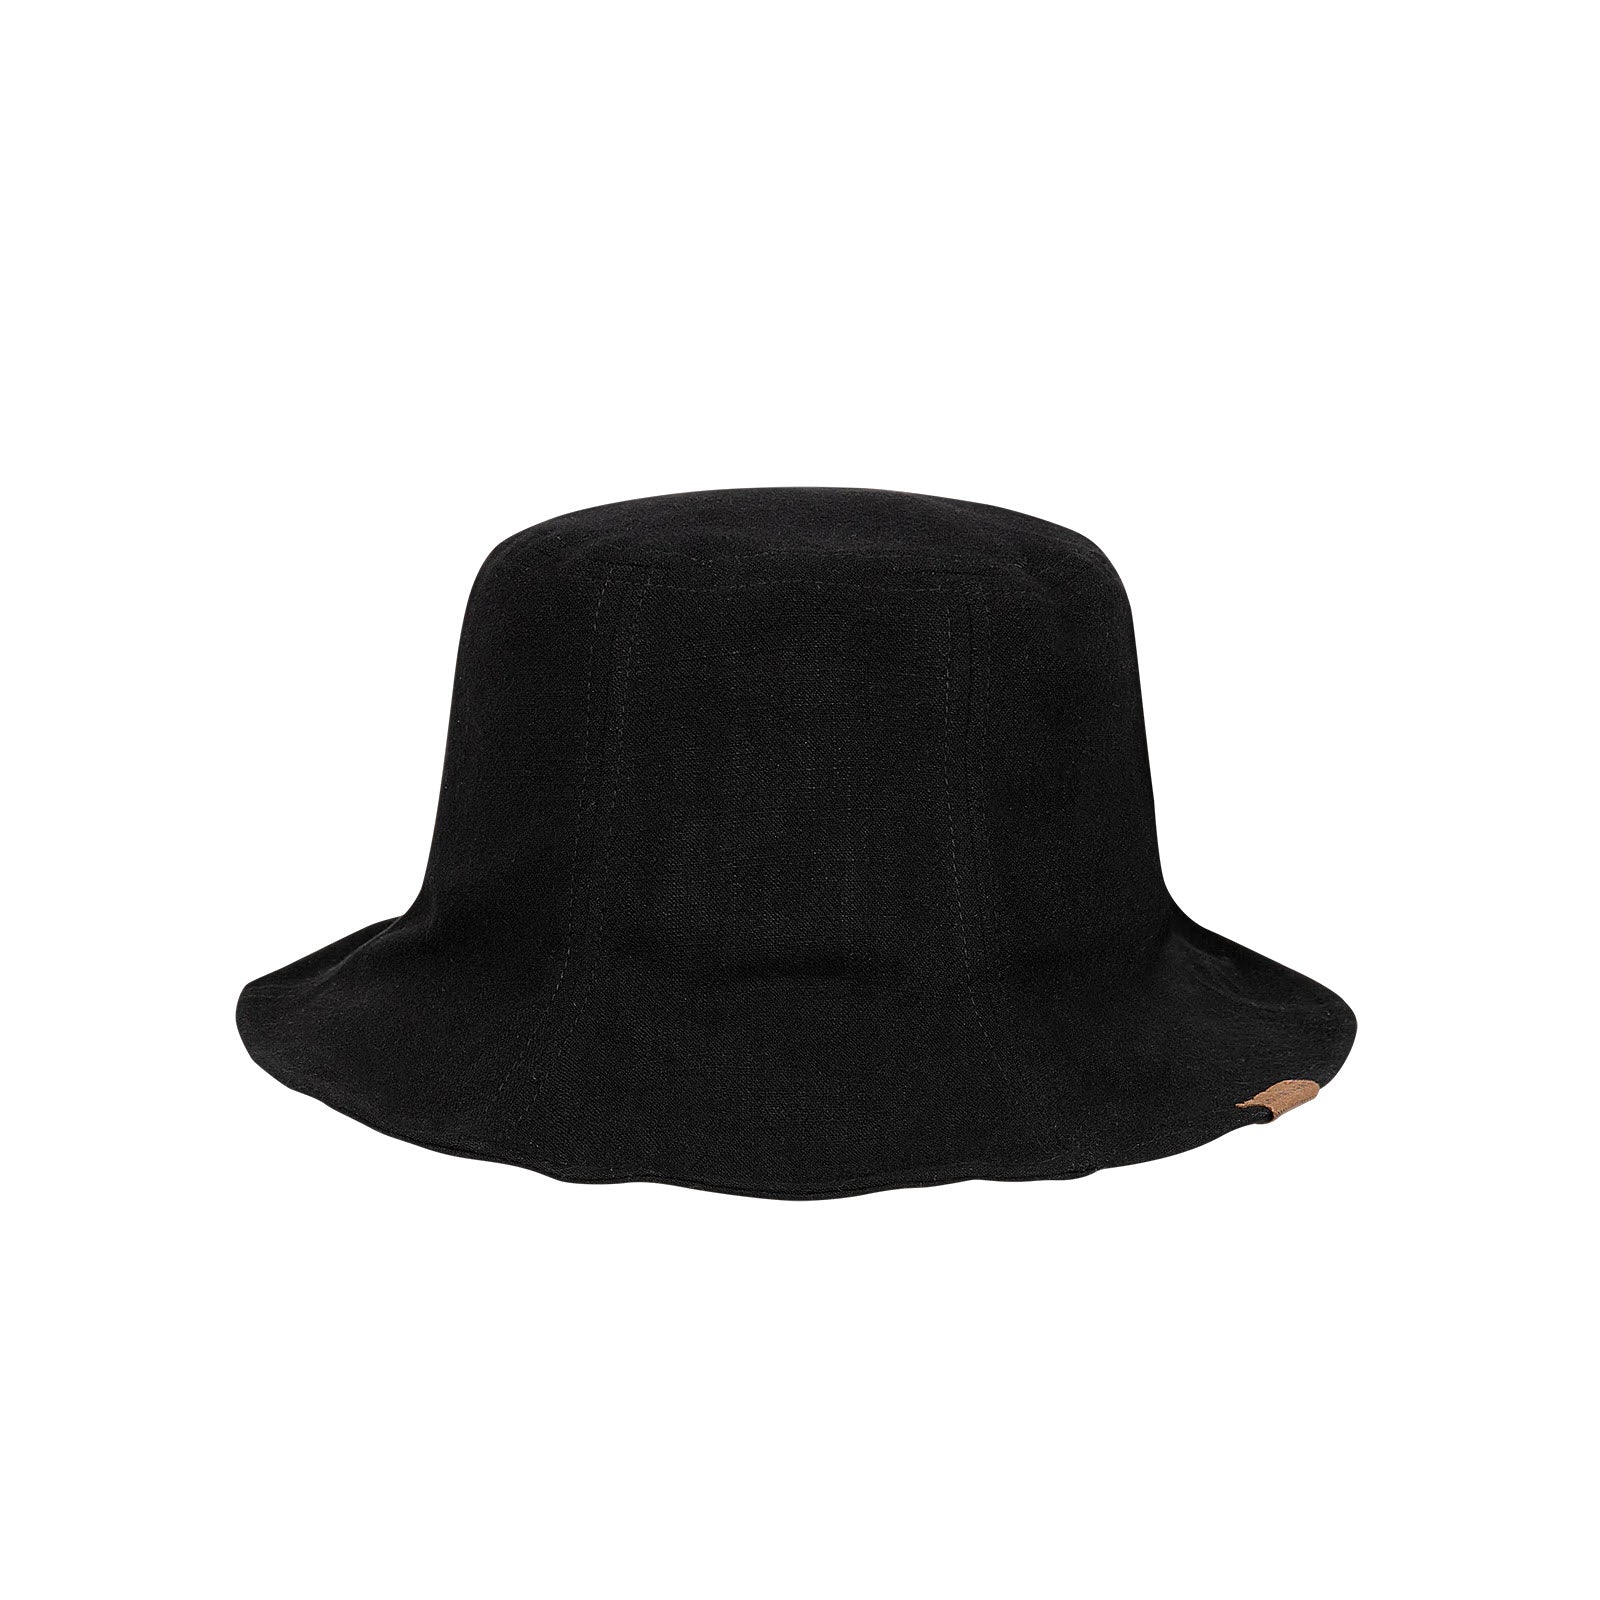 Kooringal Keppel Bucket Black hat with a slight brim and cotton lining, featuring a small logo tag on the side, isolated on a white background.